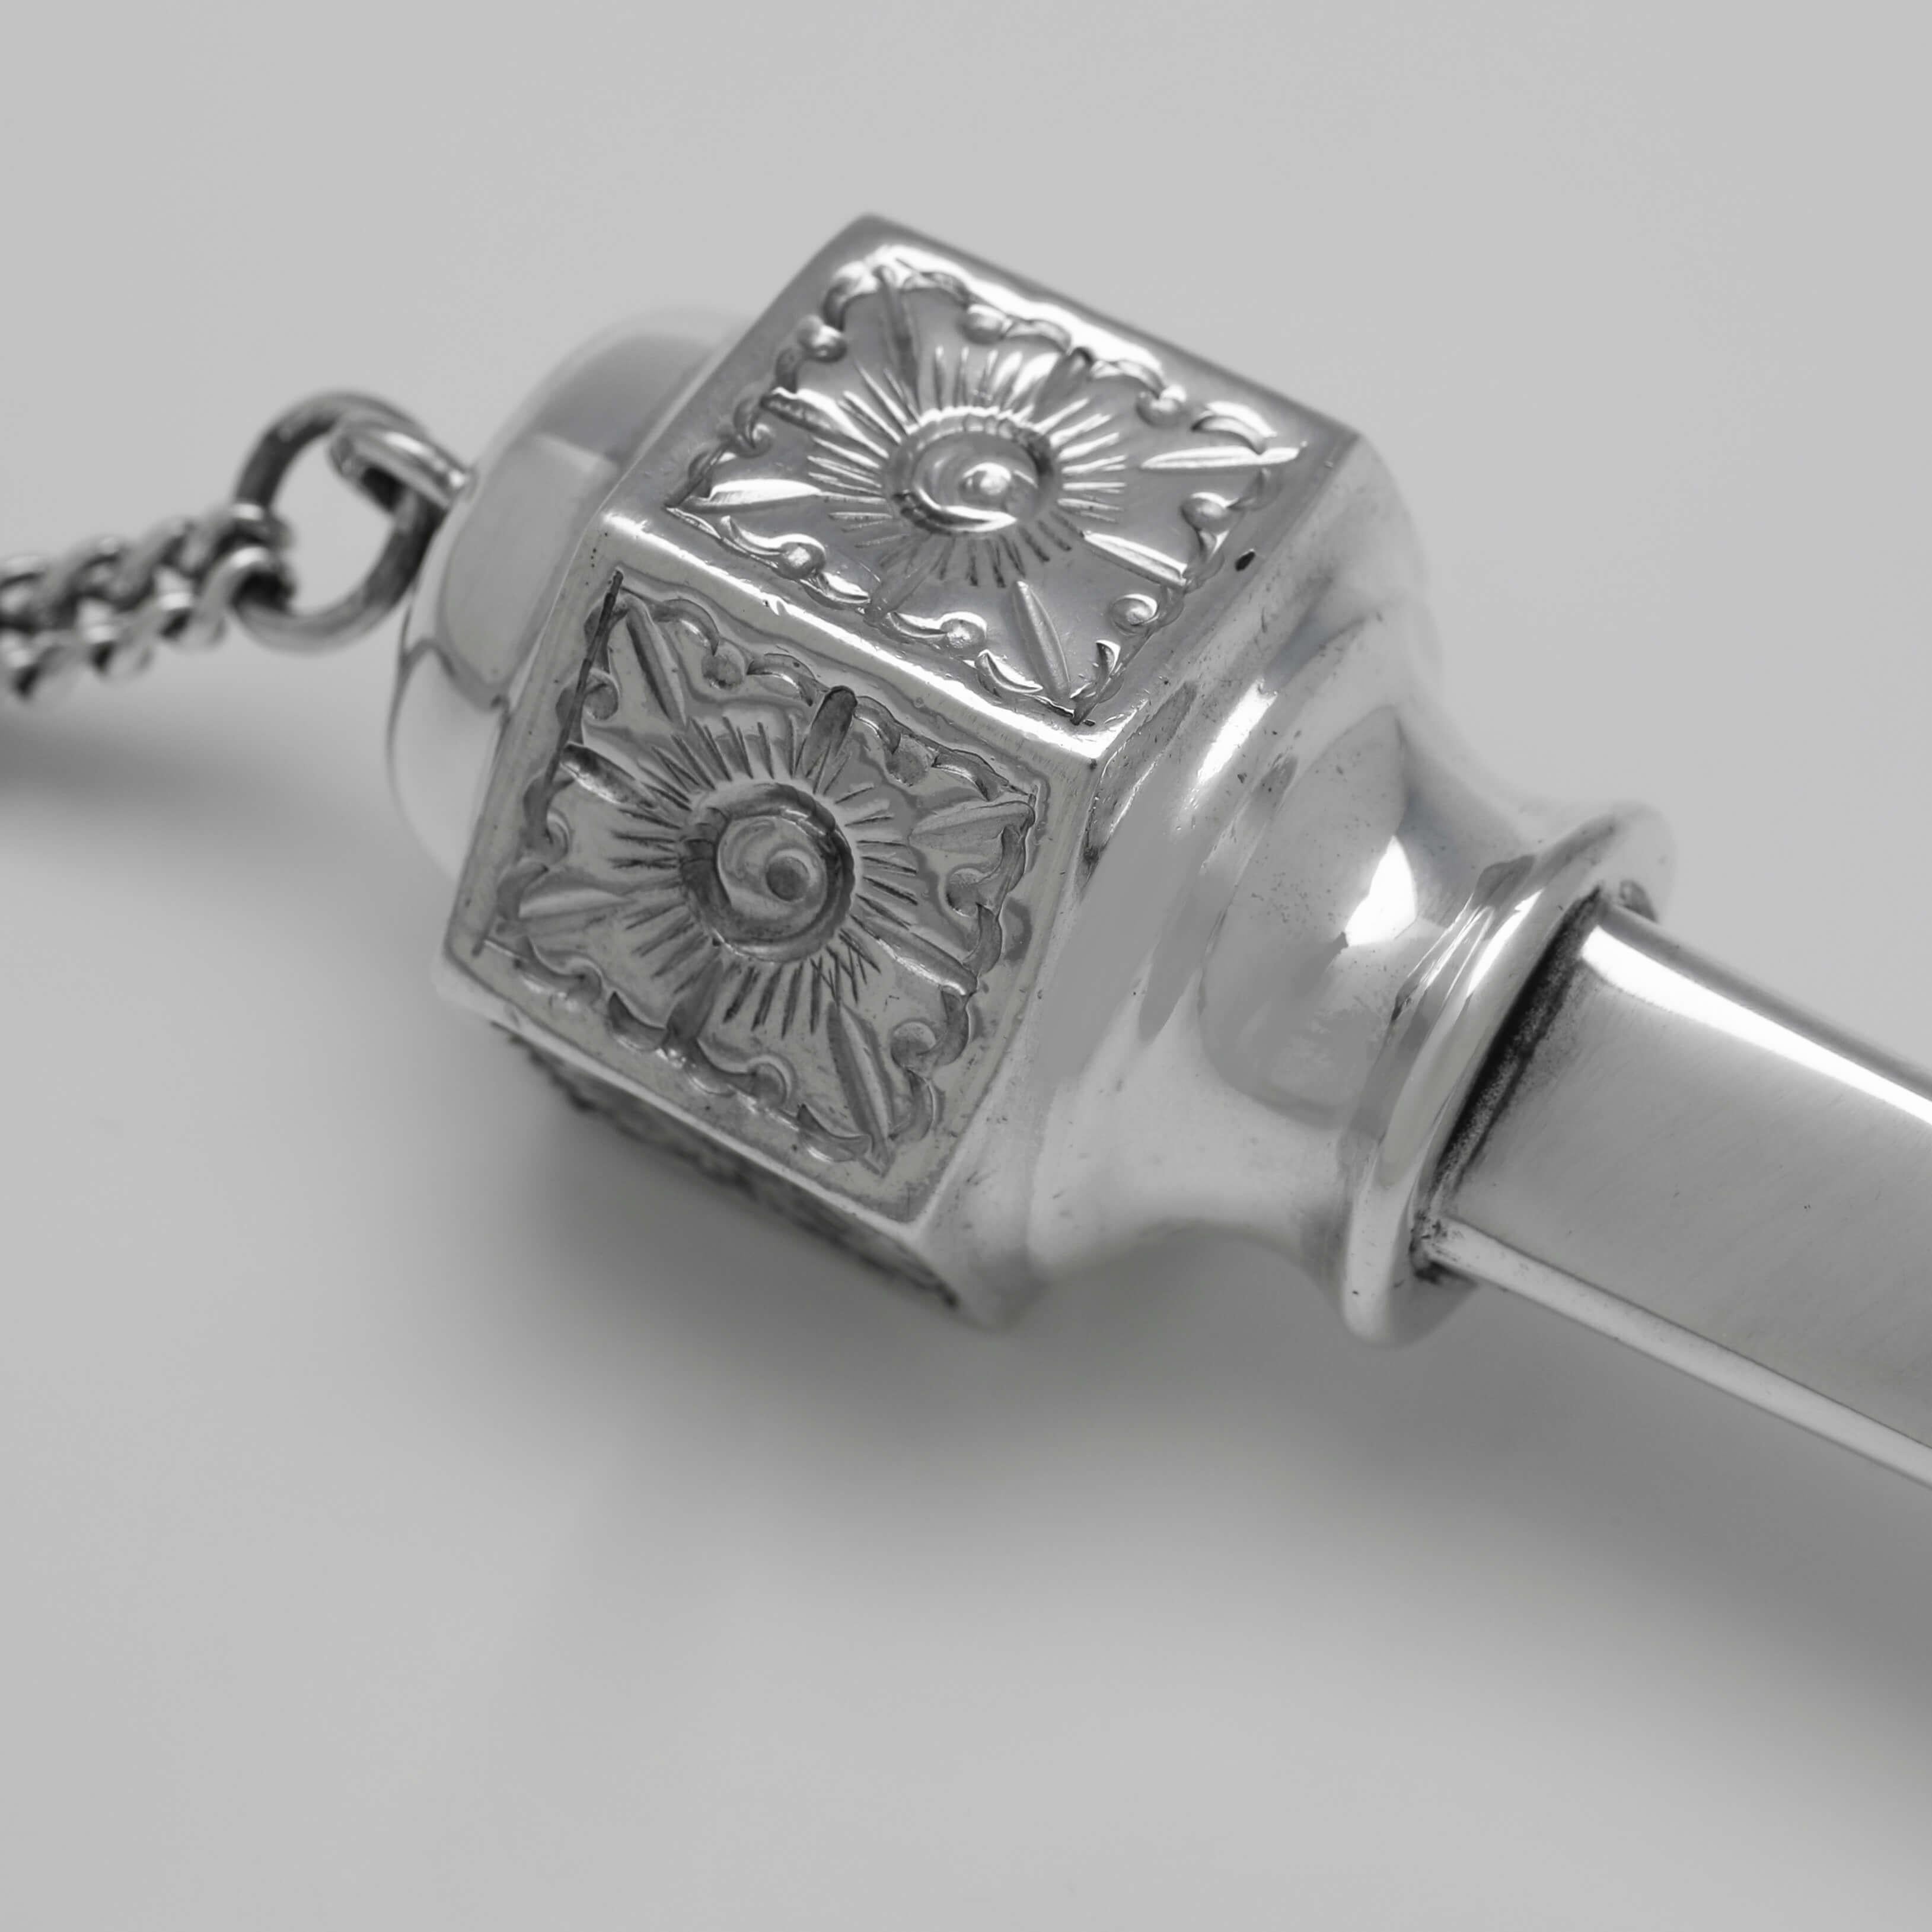 Hallmarked in London in 1929, this charming, Sterling Silver Yad, or Torah Pointer, is of traditional form. 

The yad measures 11.5